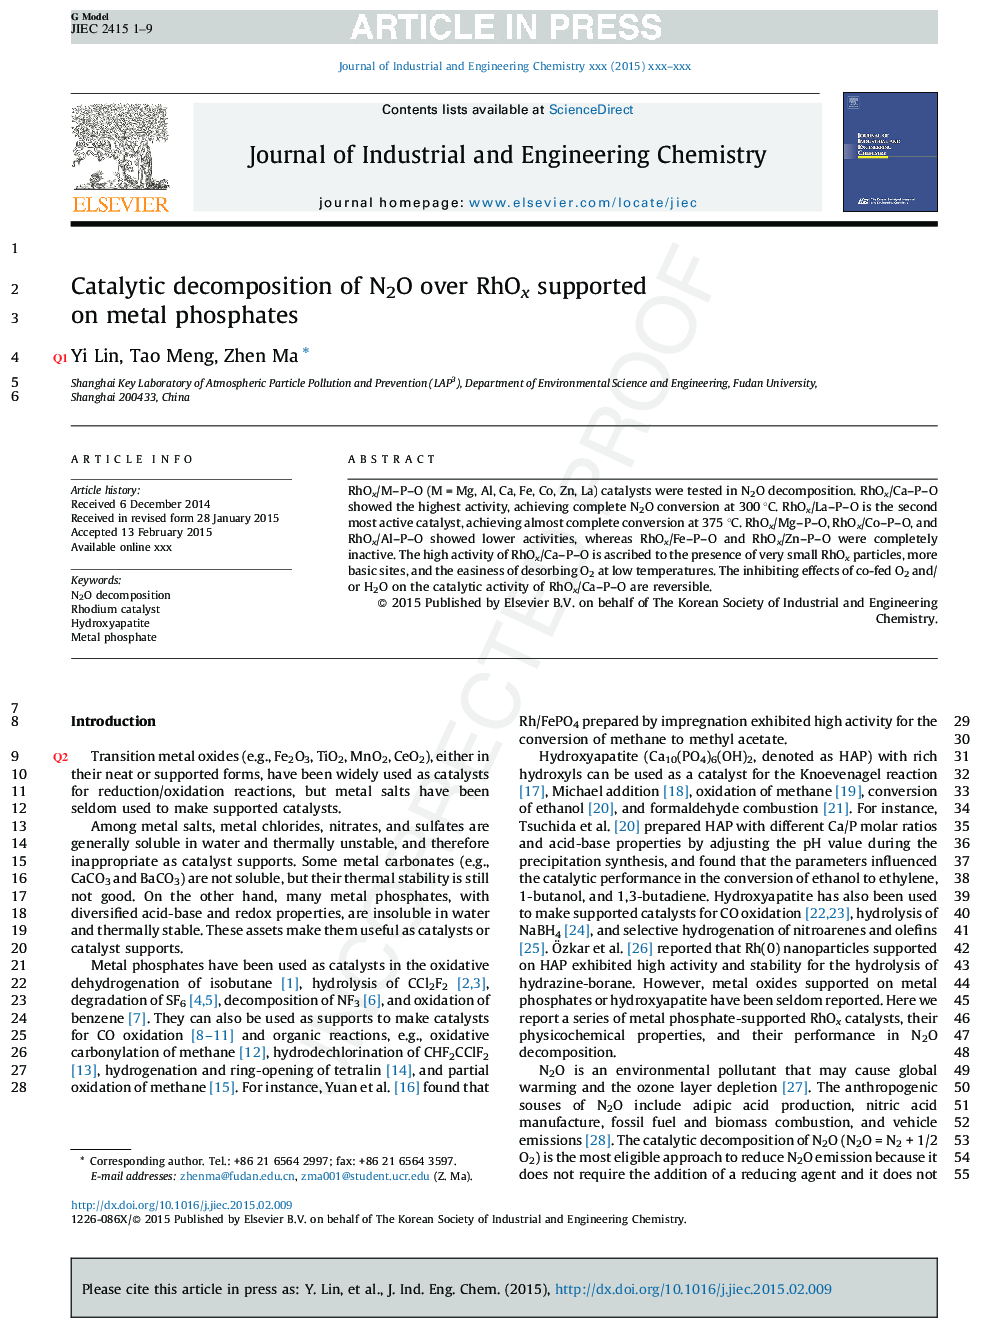 Catalytic decomposition of N2O over RhOx supported on metal phosphates